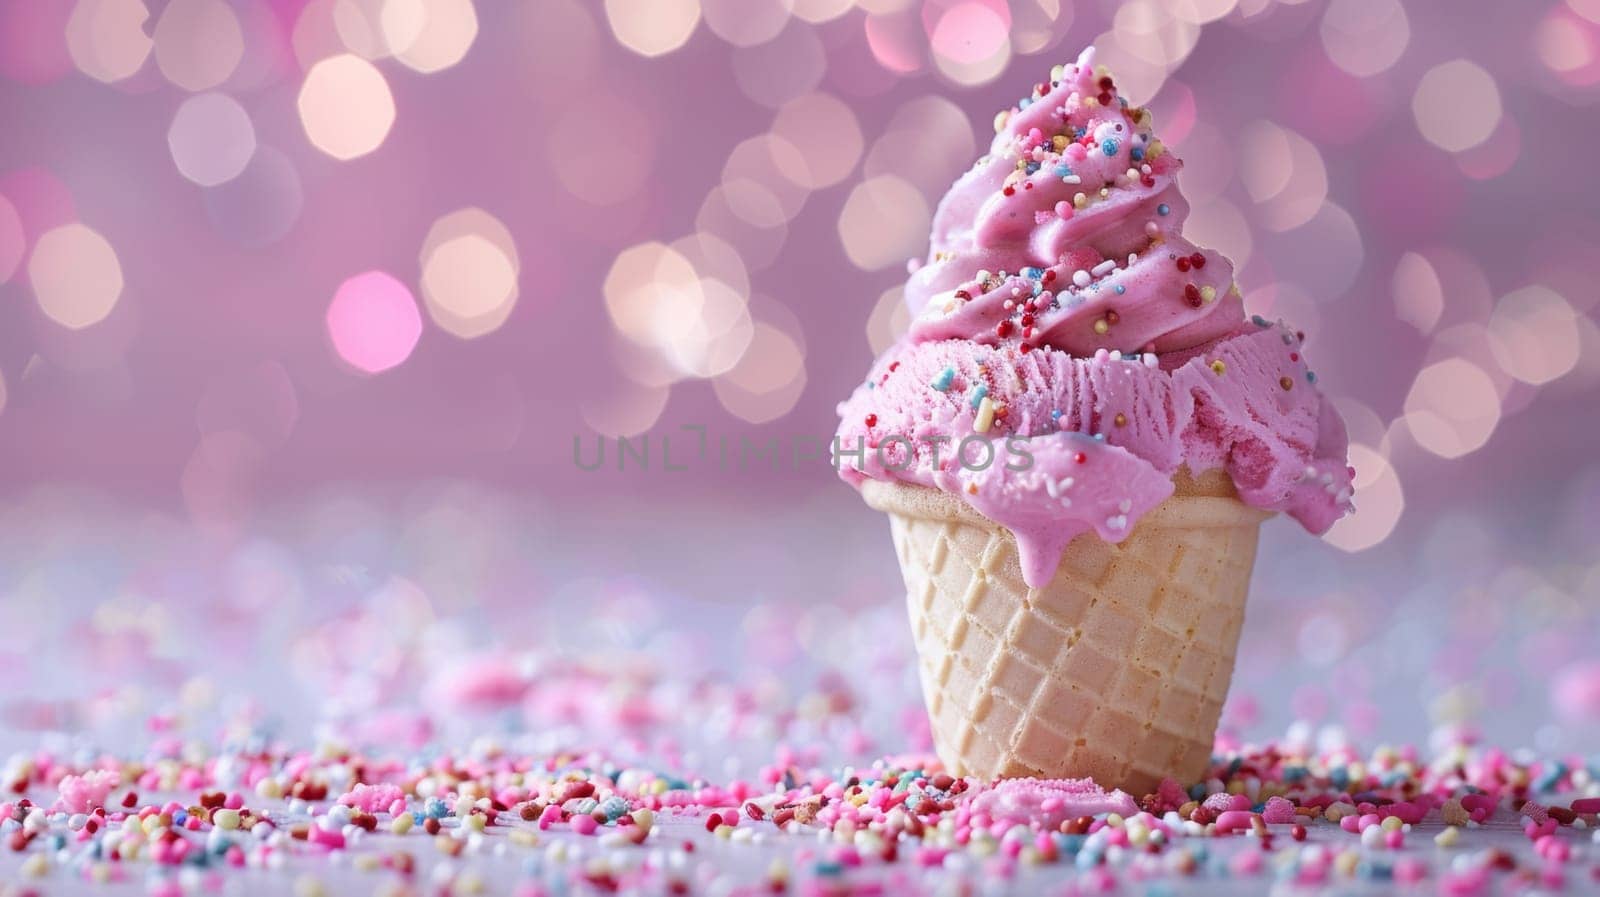 A close up of a ice cream cone with pink frosting